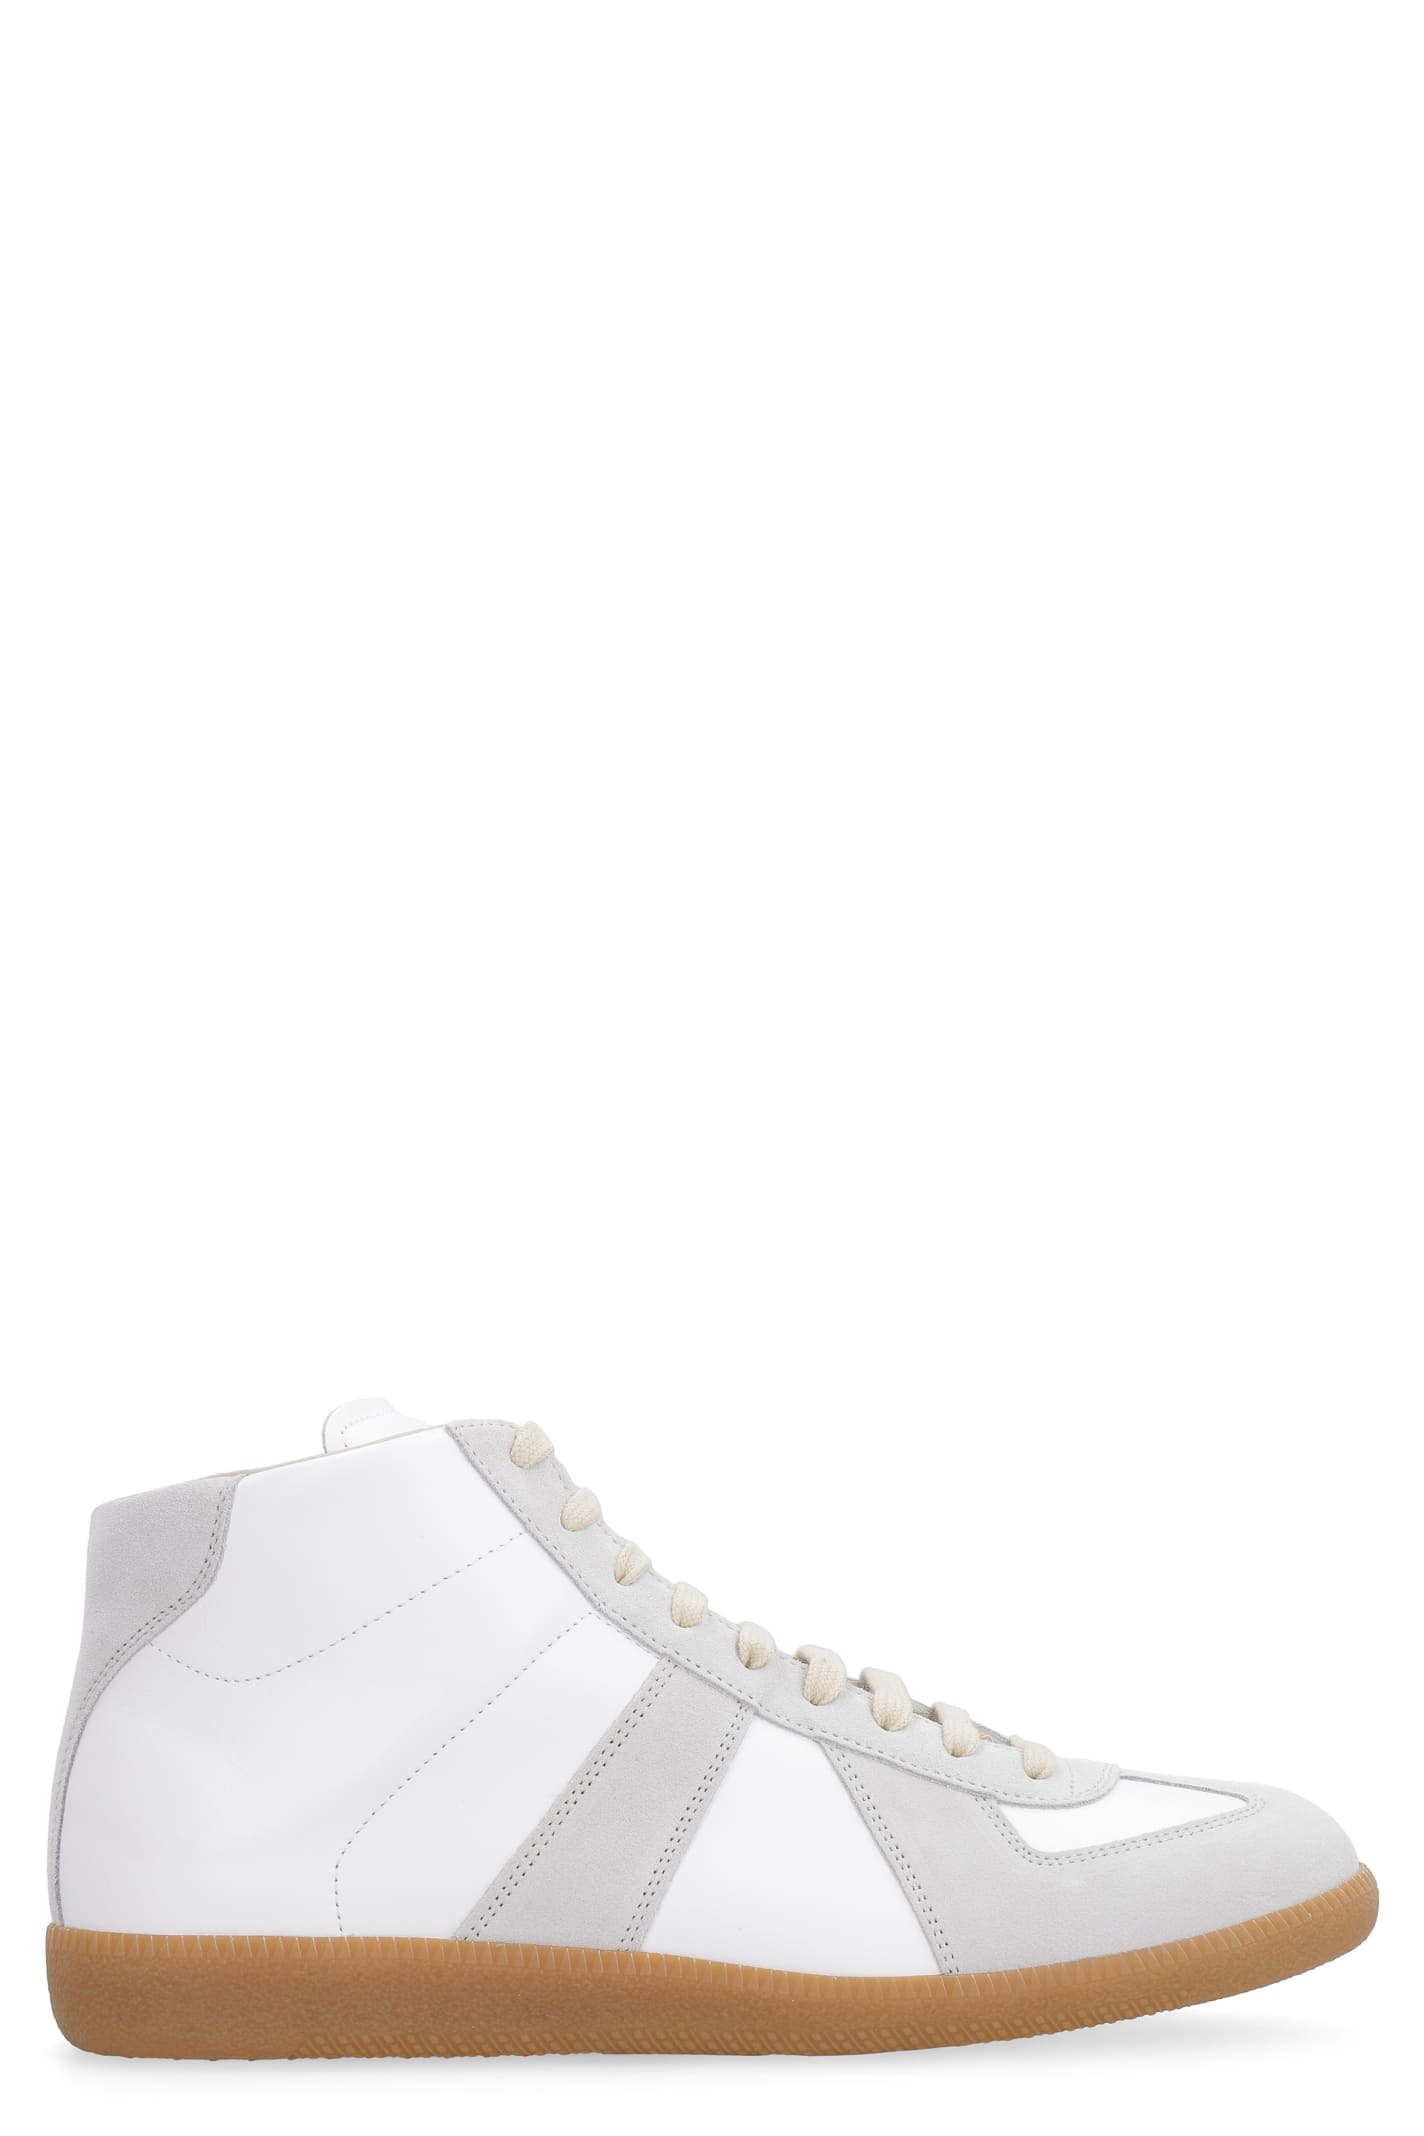 MAISON MARGIELA REPLICA HIGH-TOP LEATHER LACE-UP SNEAKERS,11206708